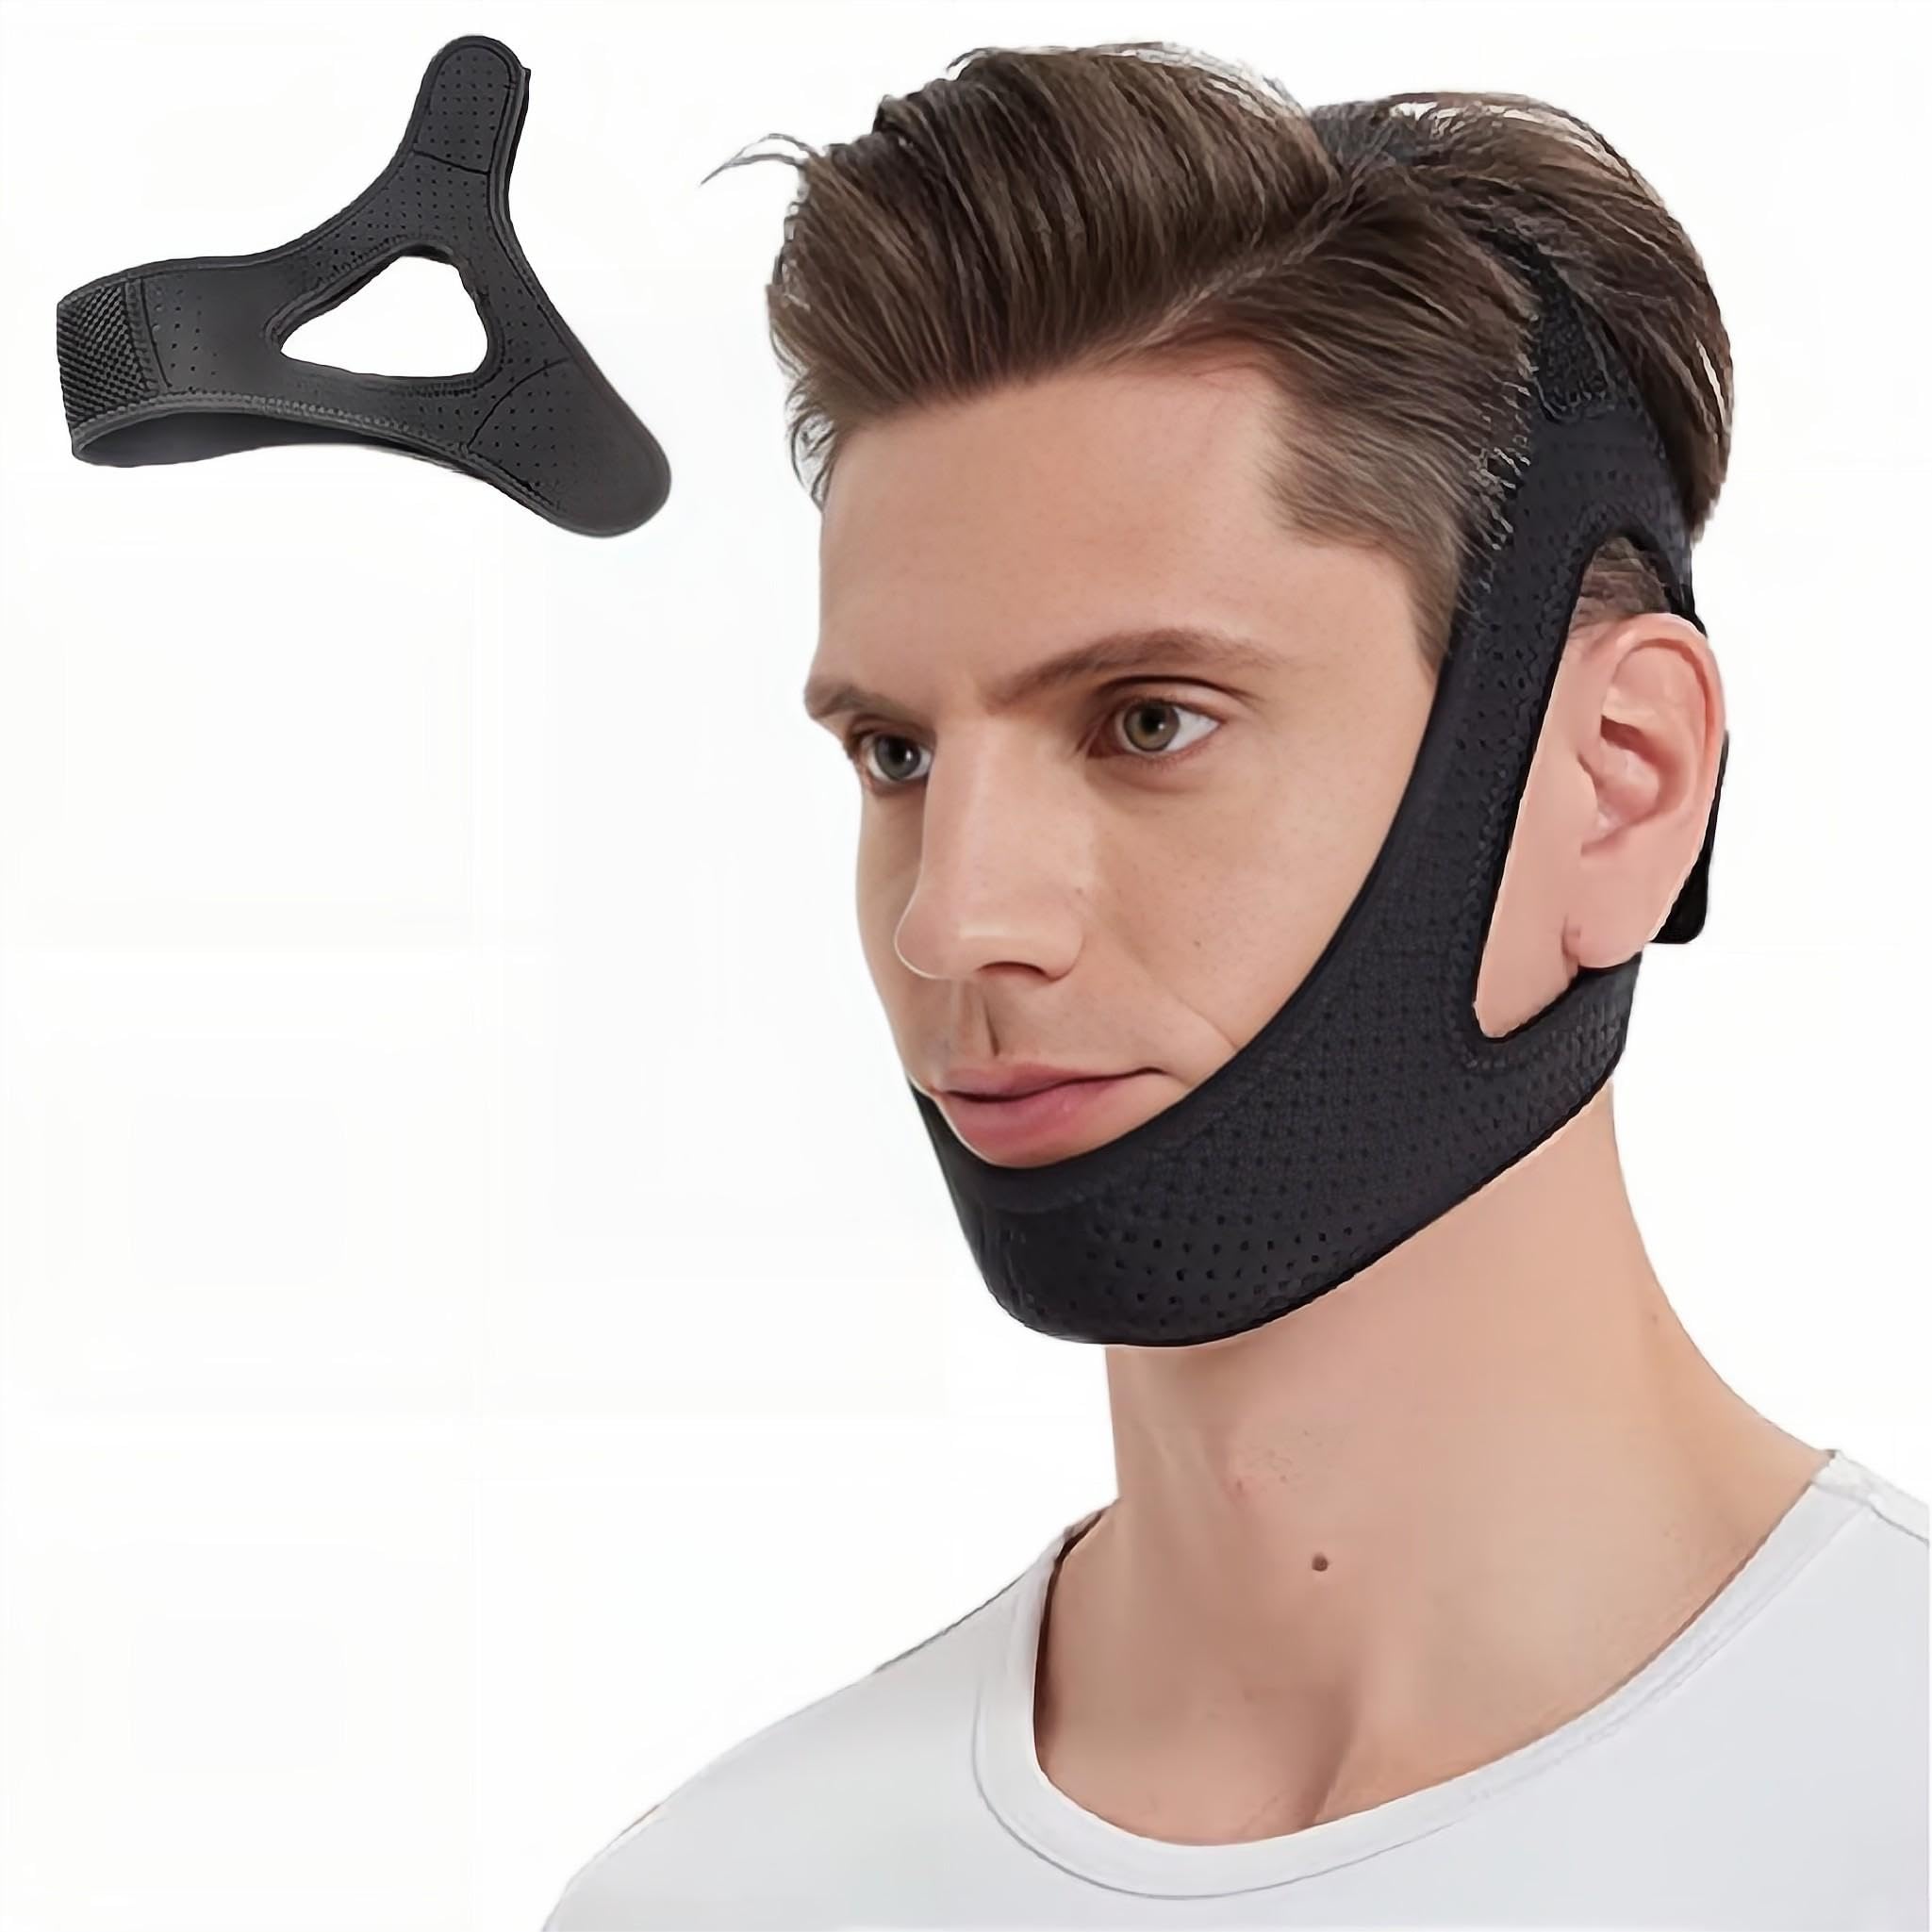 Adjustable Anti Snore Chin Strap, Neck Collar Against Snoring